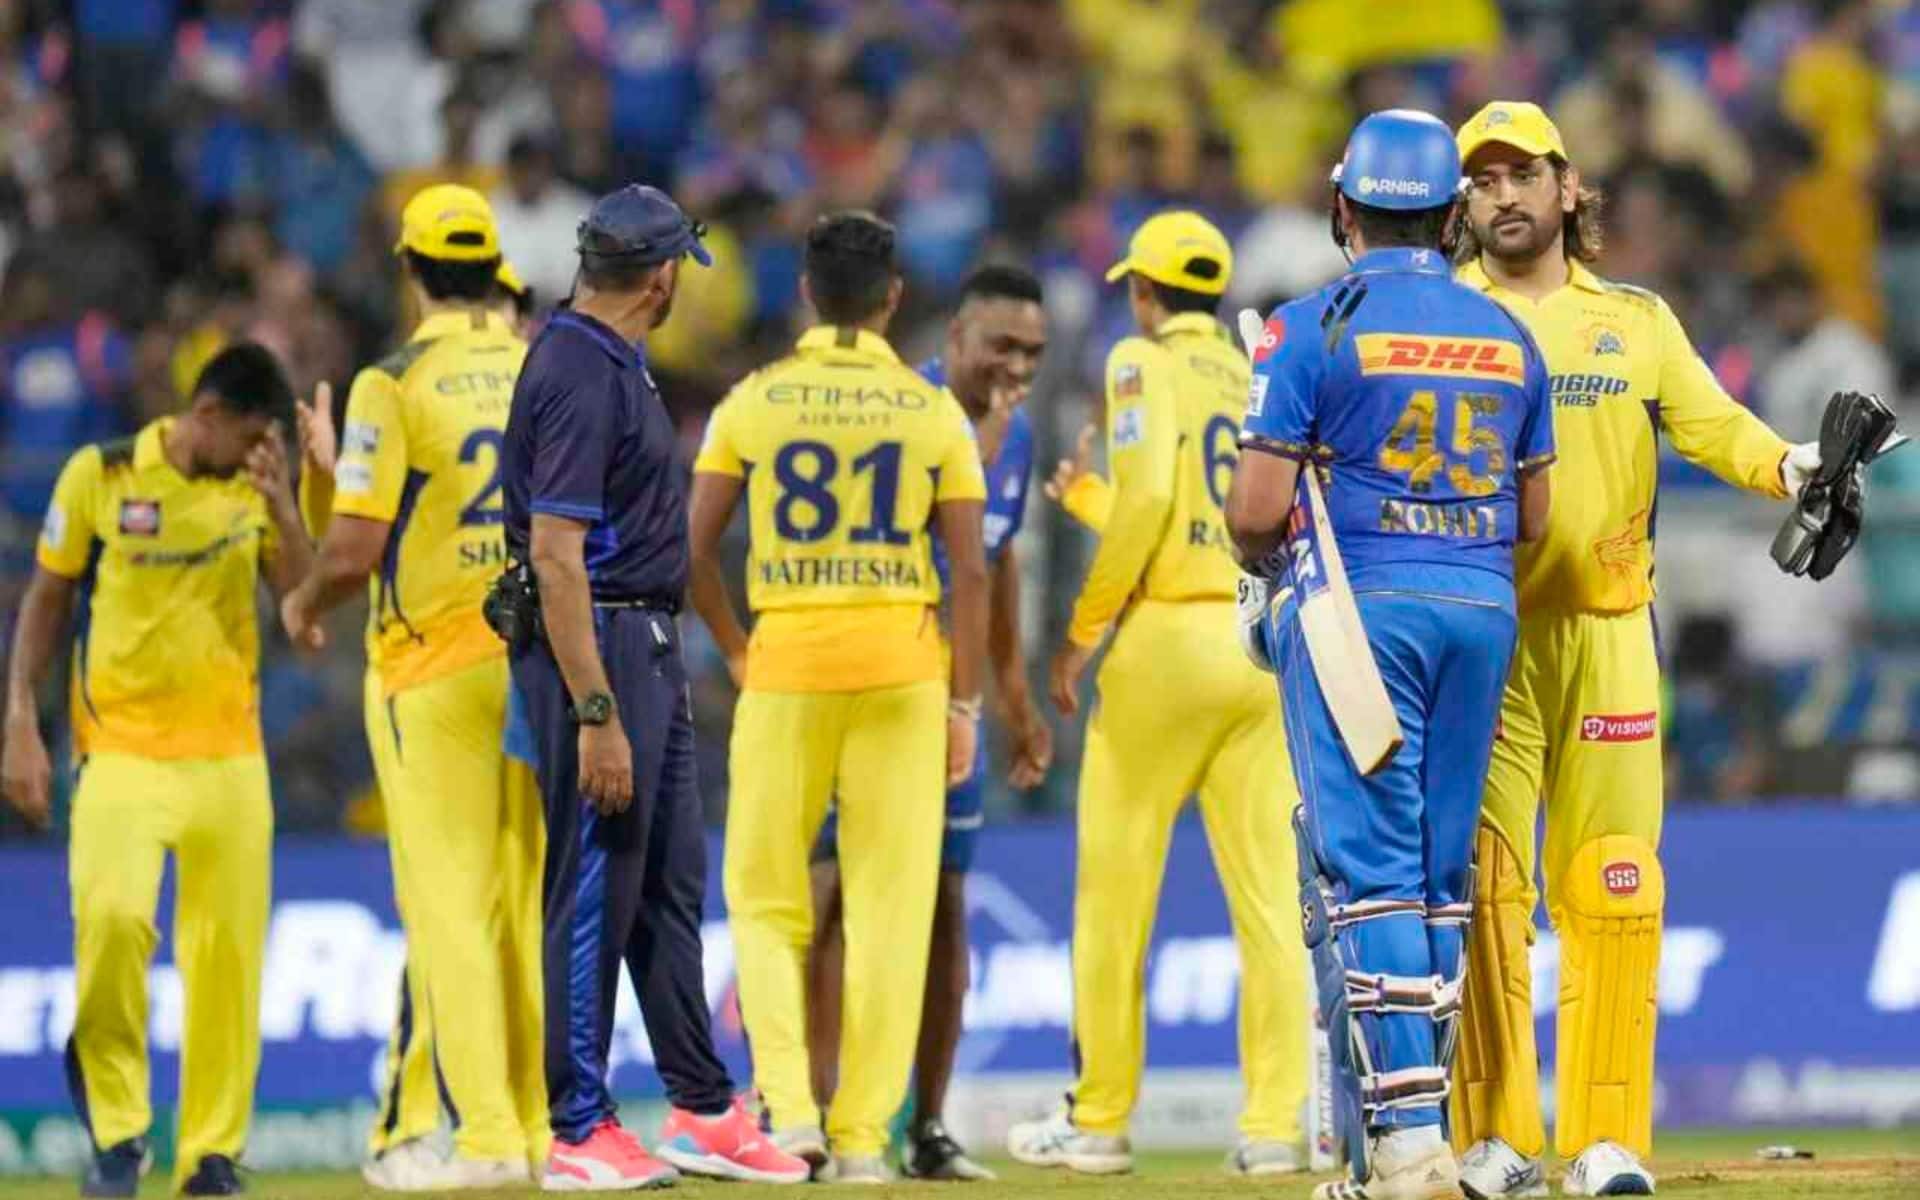 MI and CSK players greet each other after the match (BCCI)